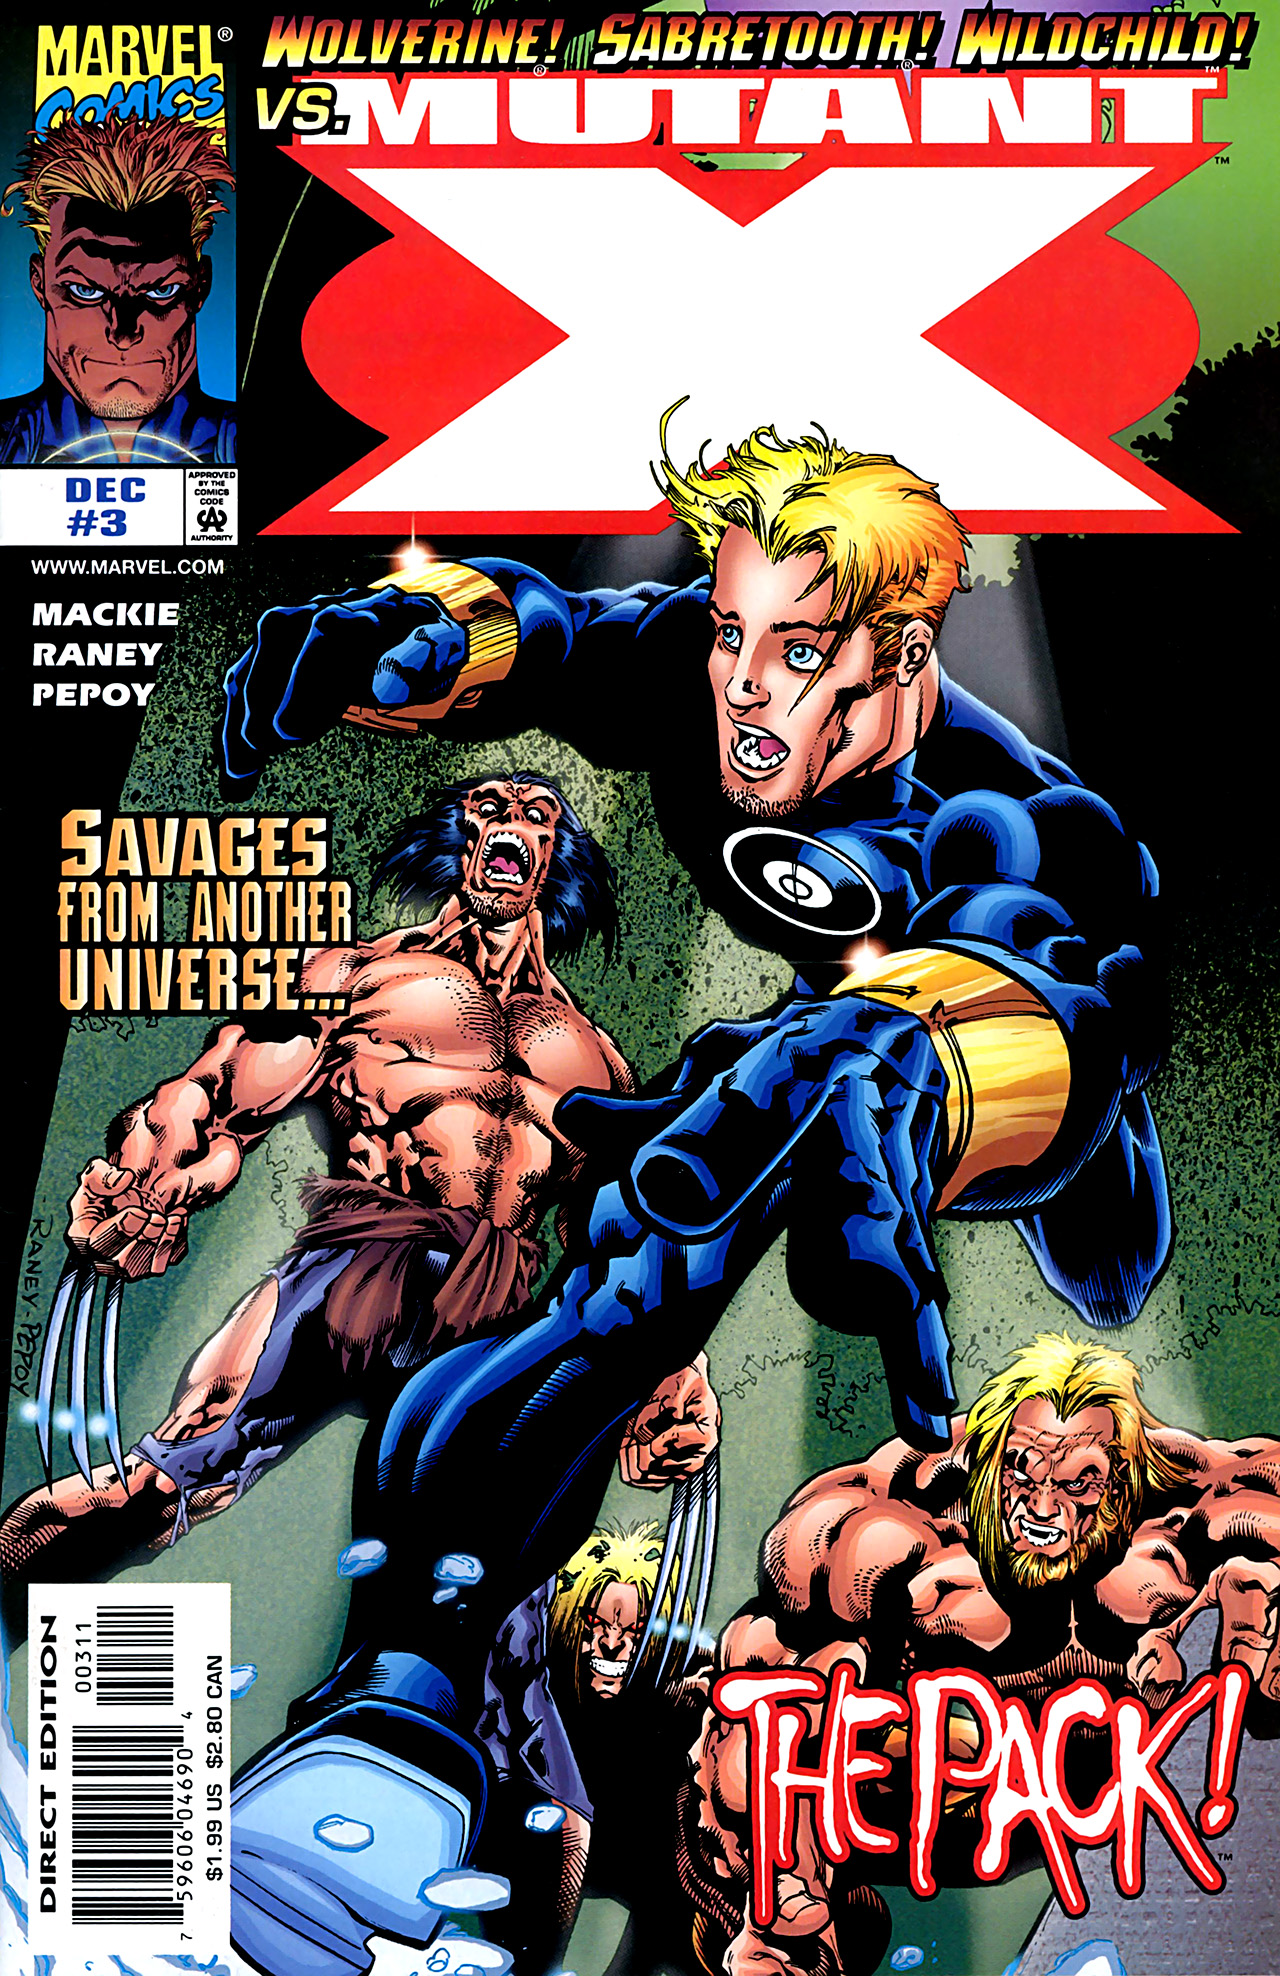 Read online Mutant X comic -  Issue #3 - 1